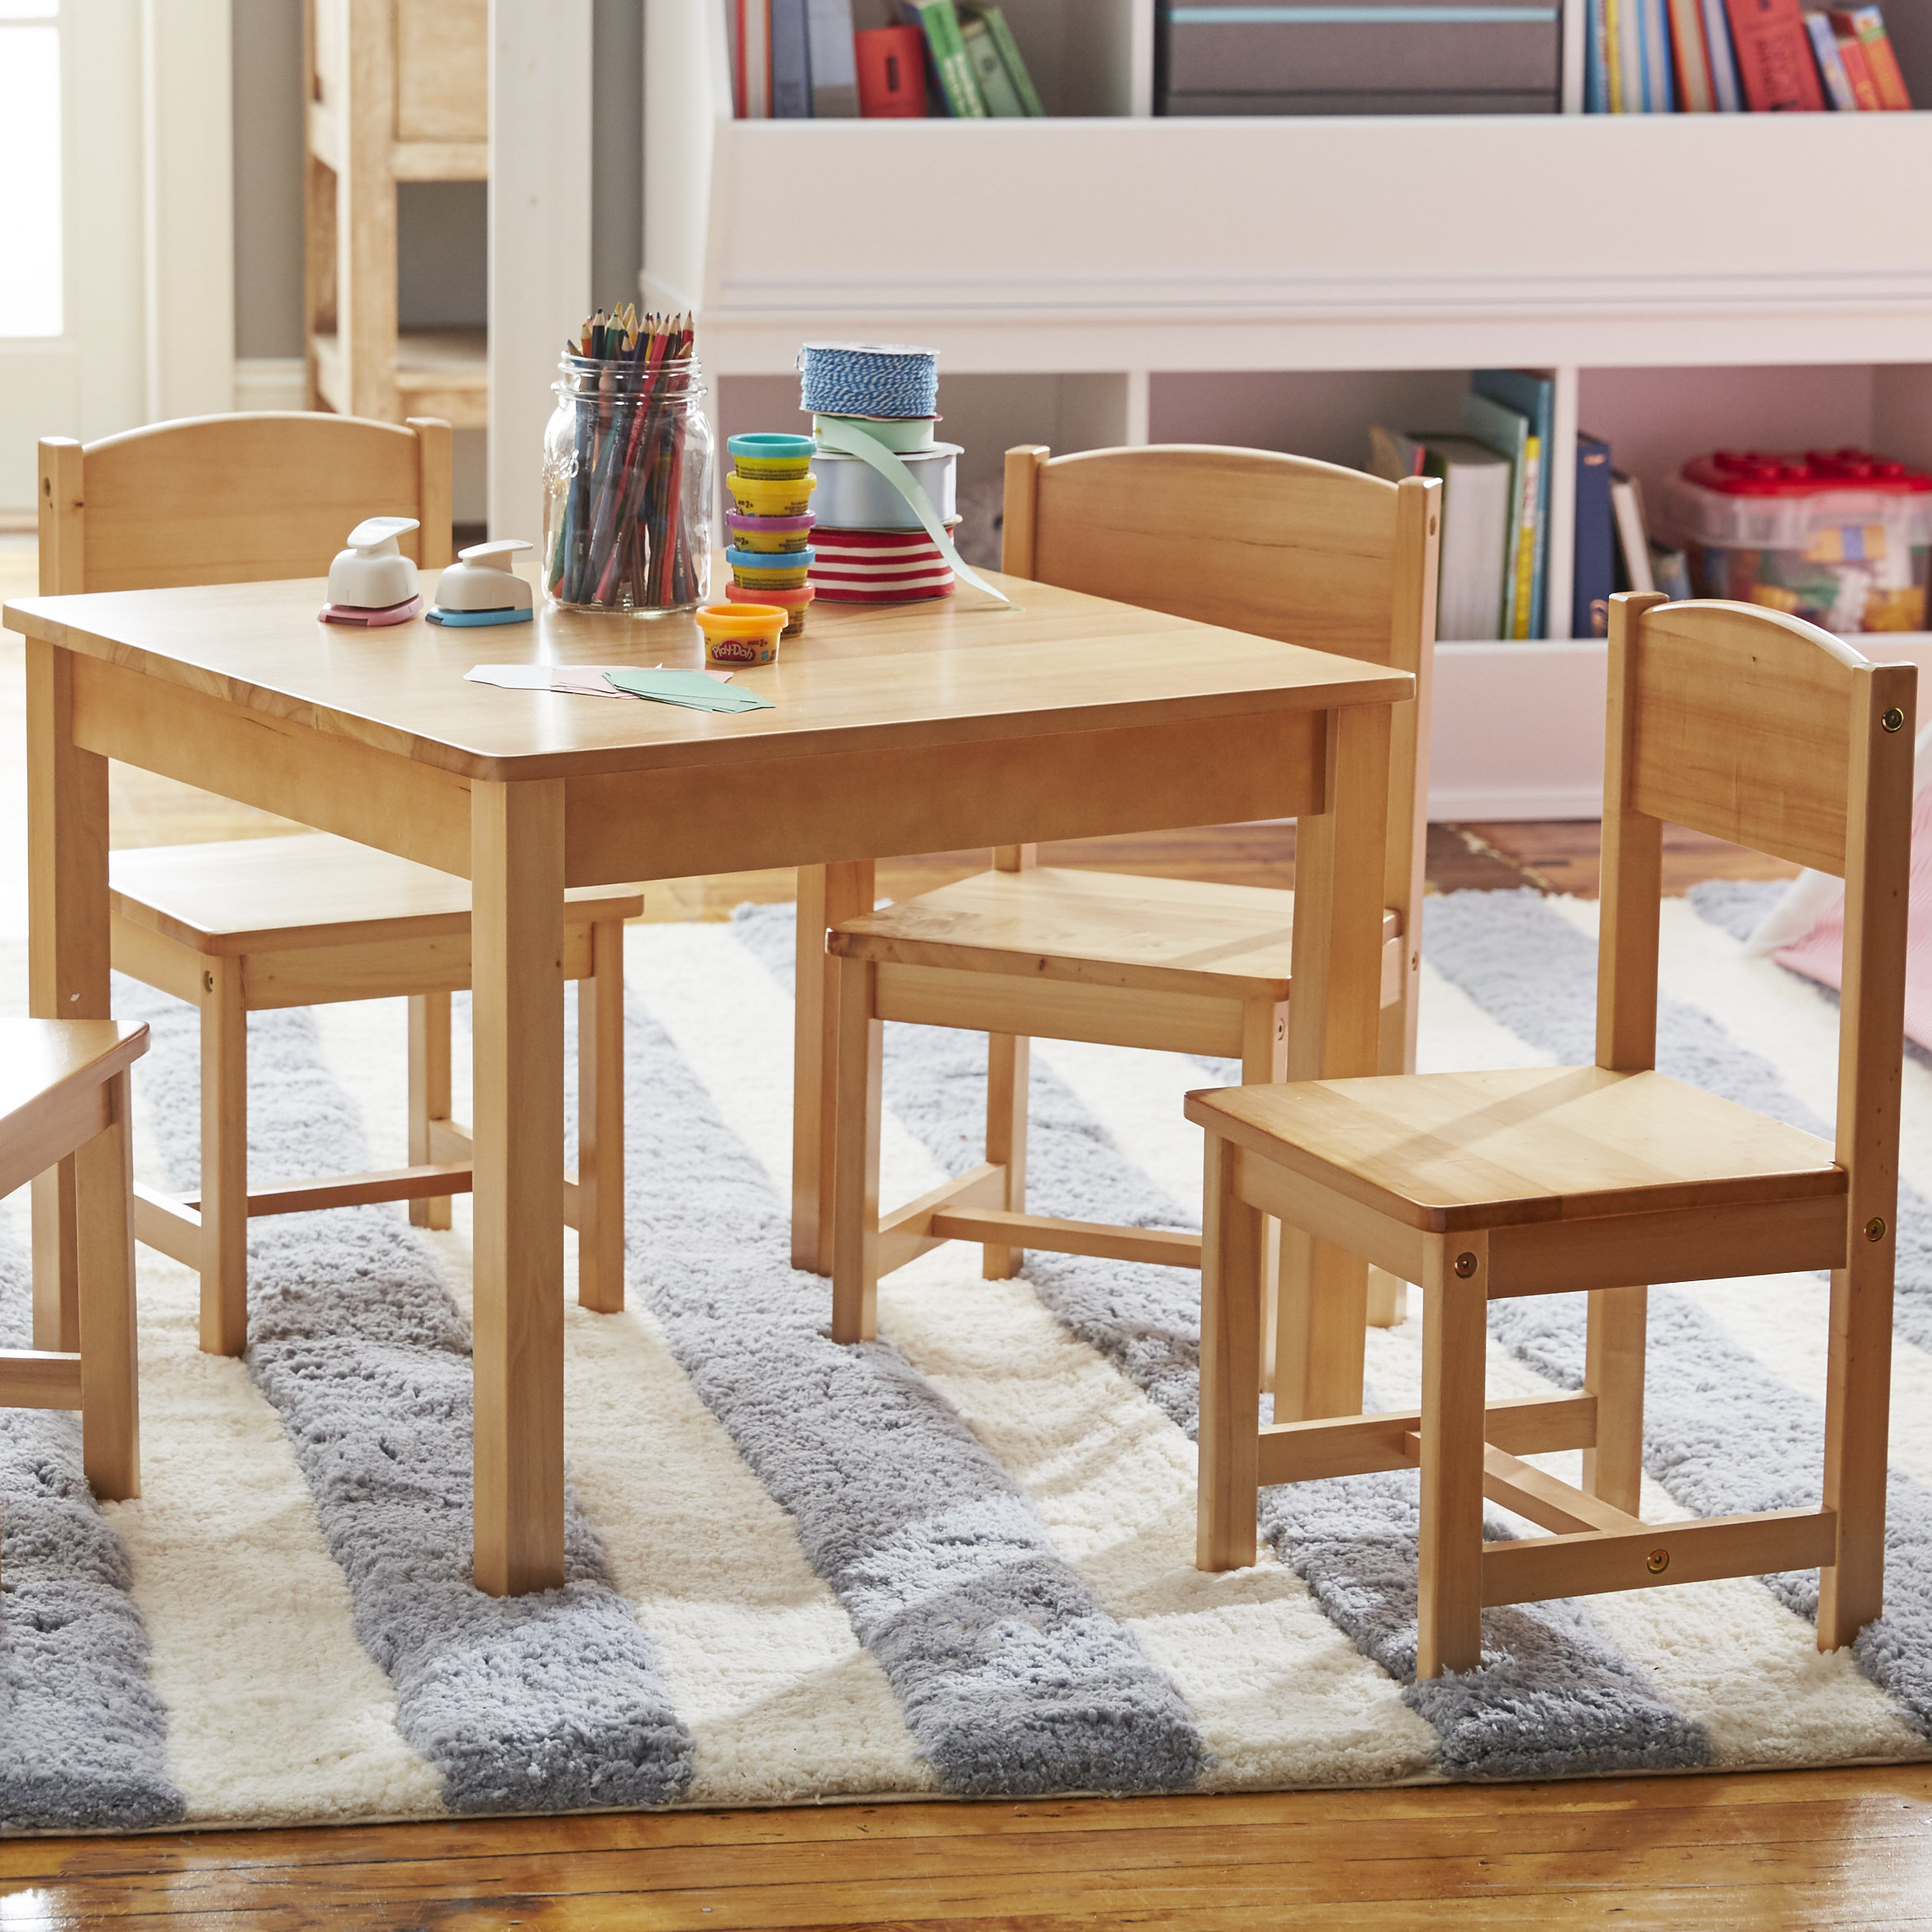 KidKraft Farmhouse Kids 5 Piece Square Table and Chair Set & Reviews